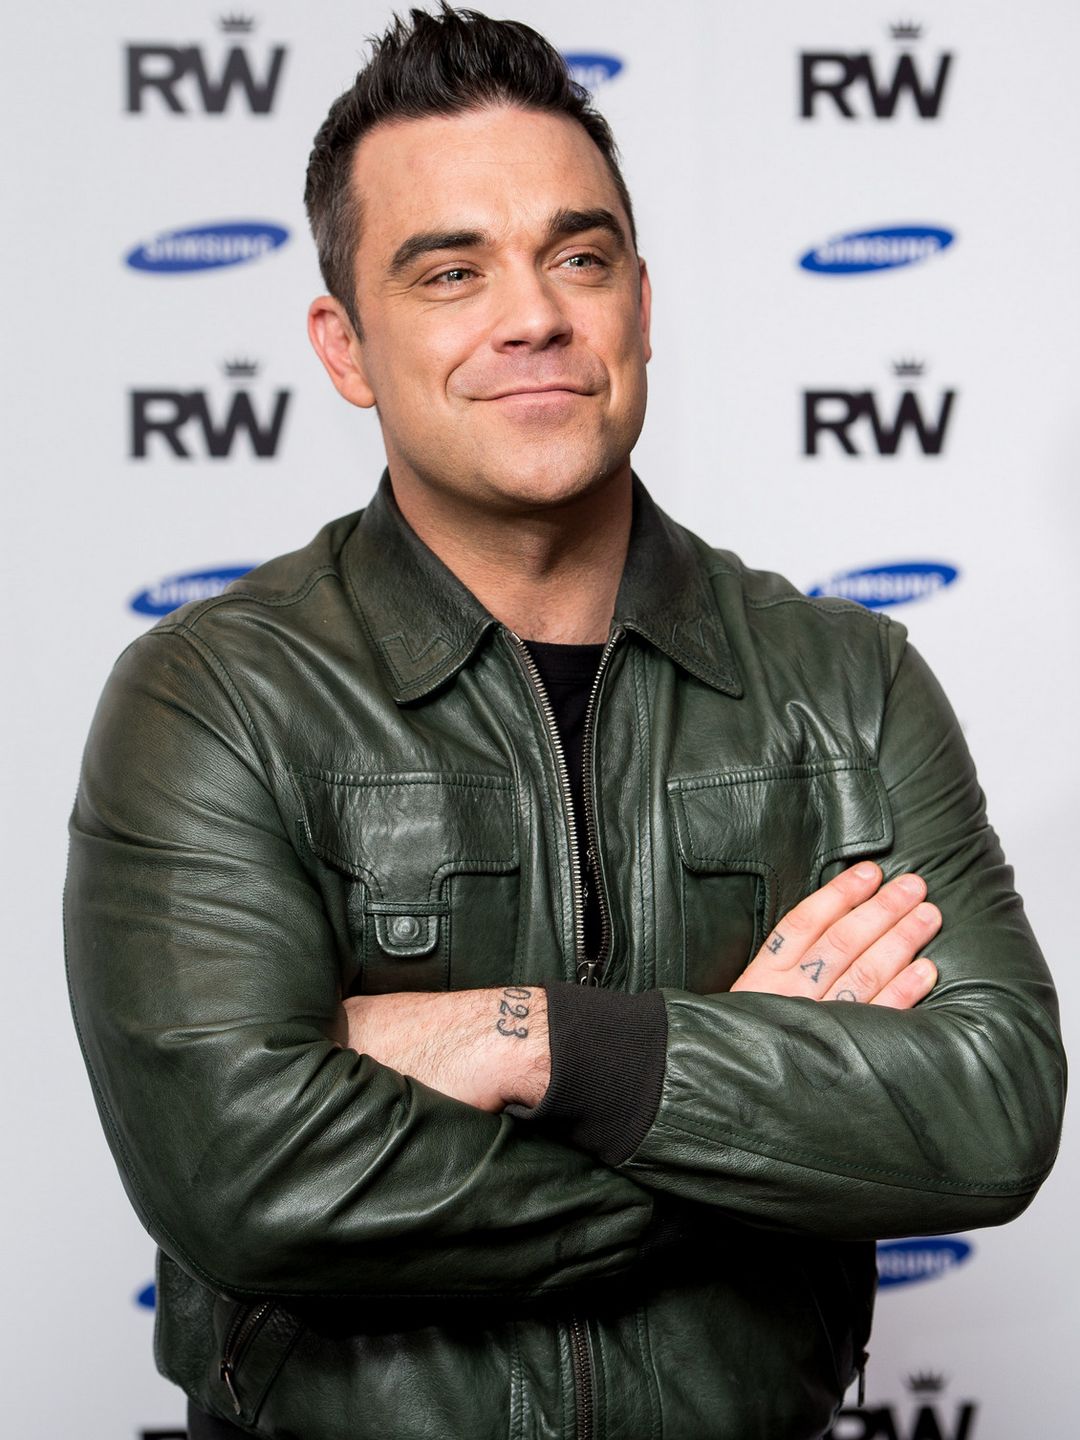 Robbie Williams young age